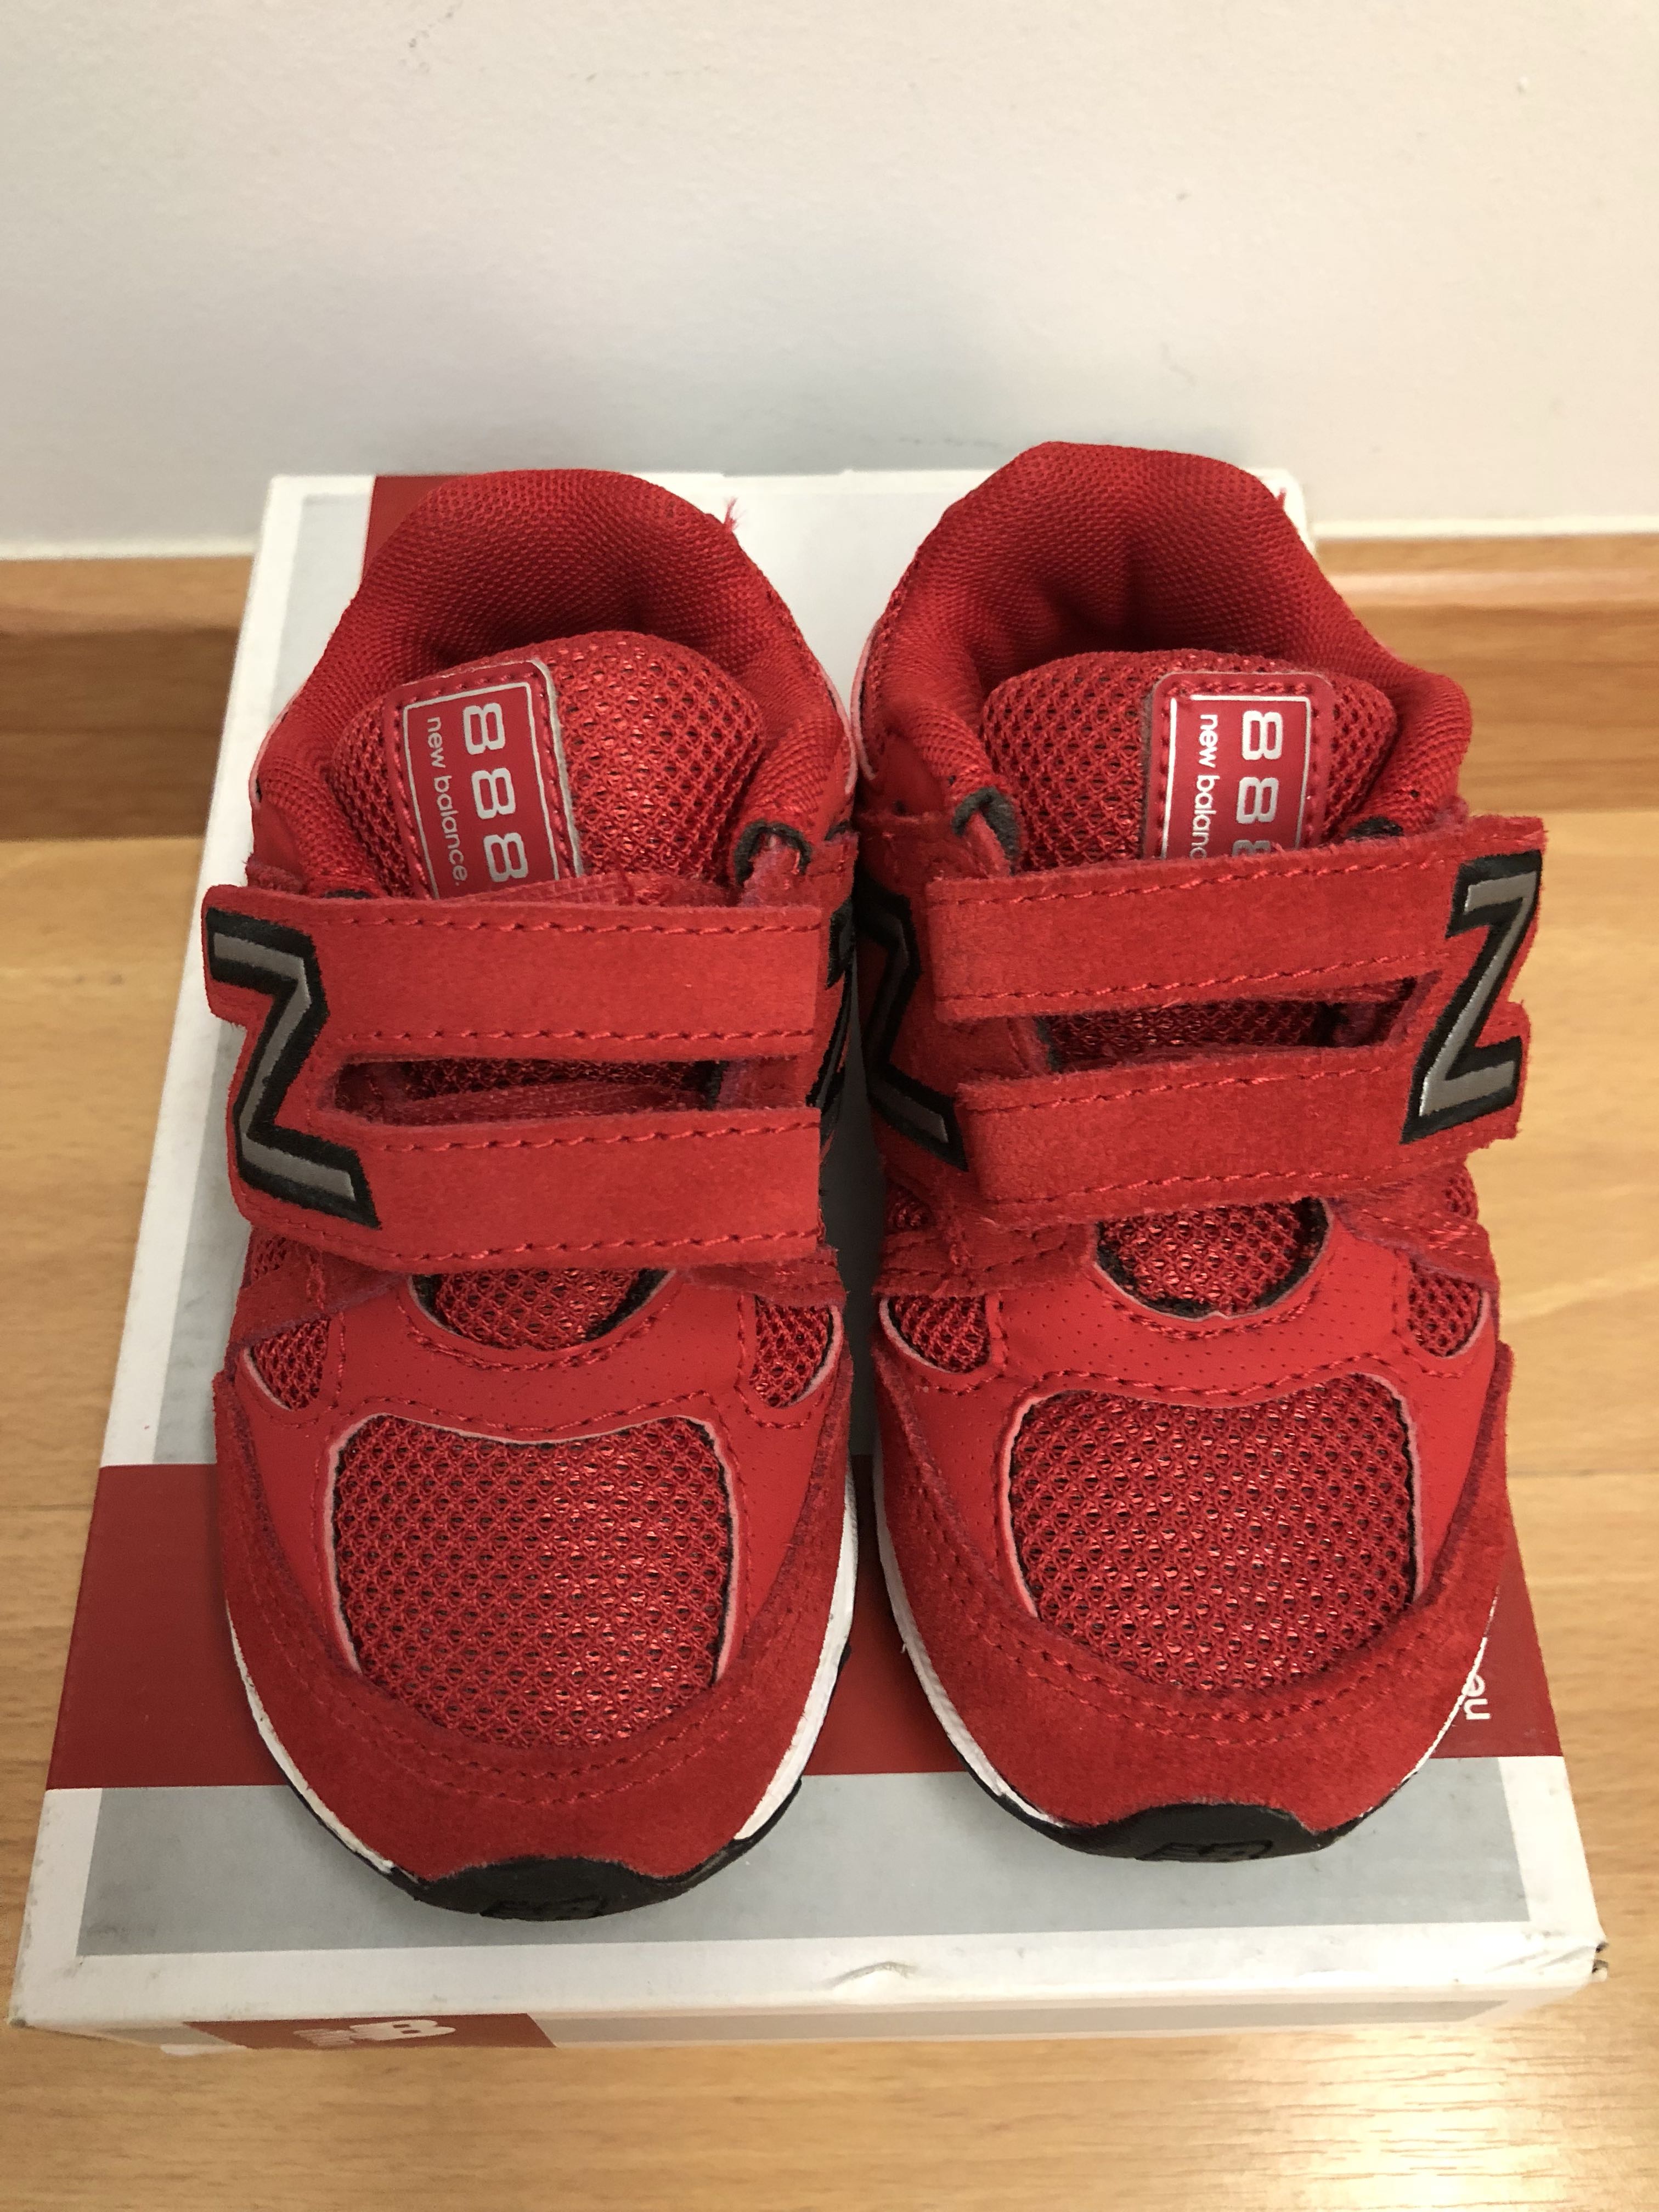 New Balance Red Sneakers size 6UK (6.5 